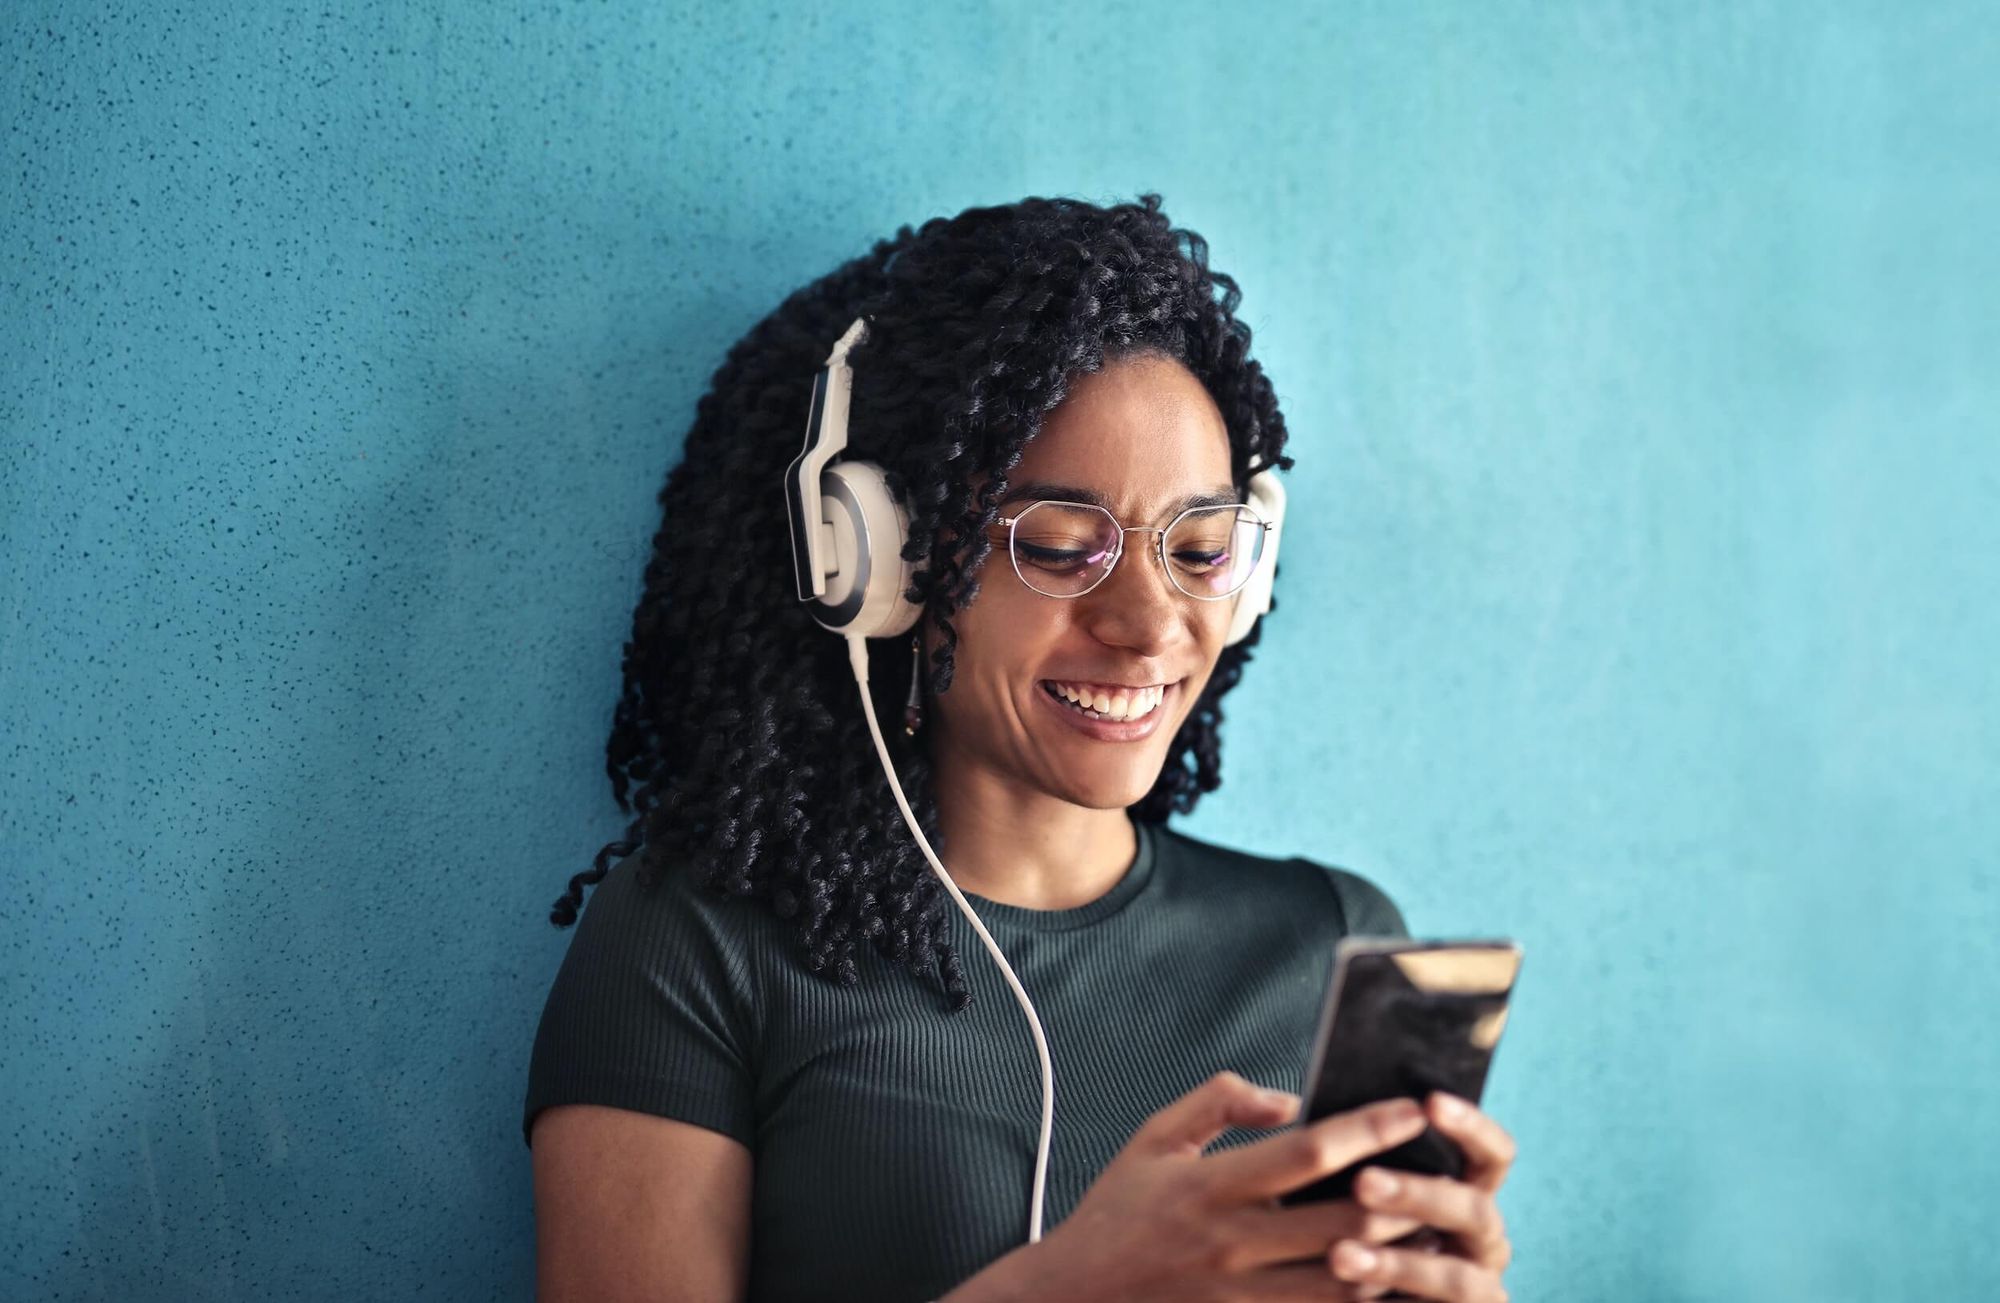 Woman of colour smiling while wearing glasses and large white headphones, looking at a mobile phone.